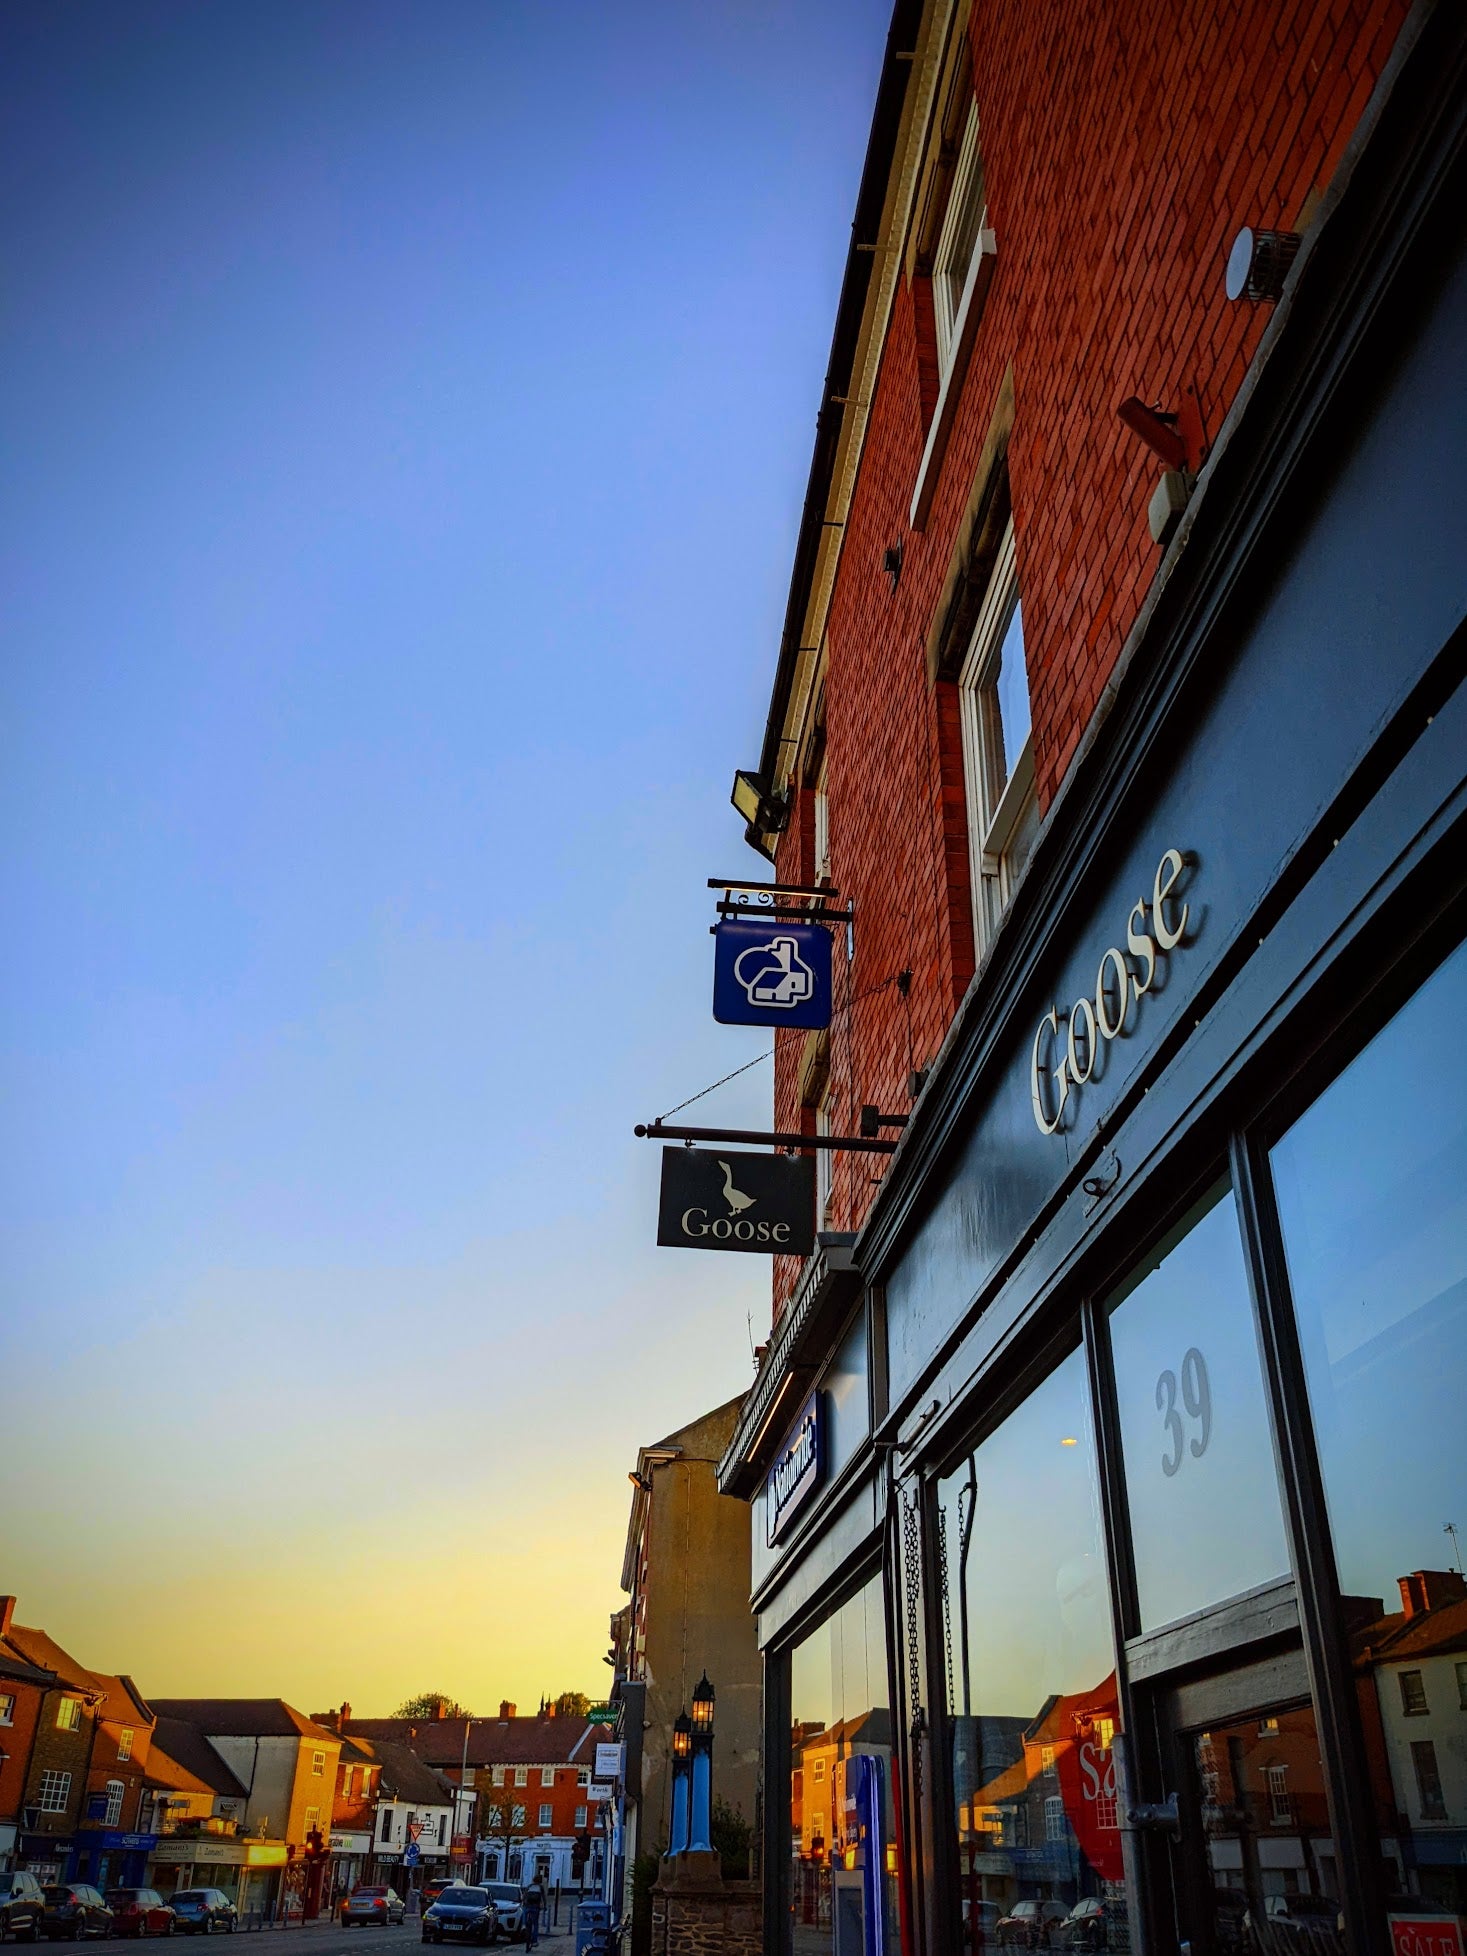 Image of Goose Womens Clothing store in Ashby De La Zouch from the outside with the sun setting in the background